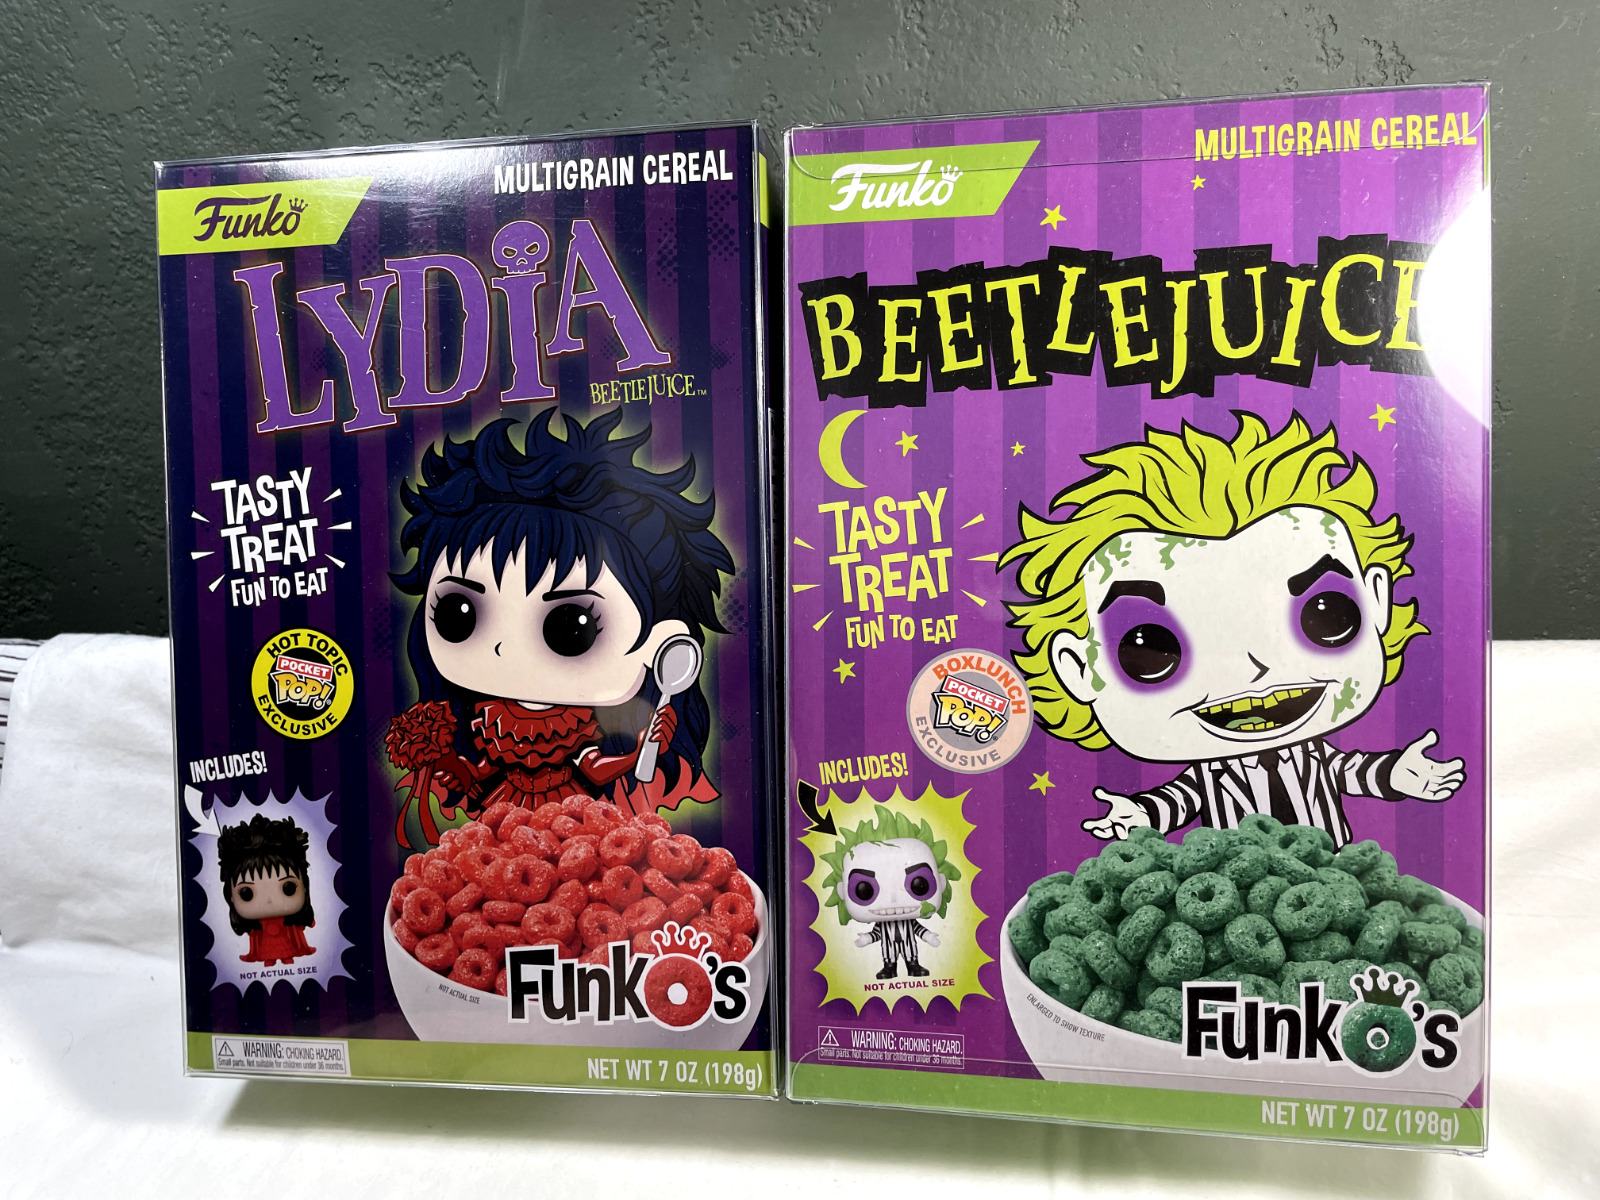 Funko POP Cereal-Beetlejuice-LYDIA & BEETLEJUICE- Hot Topic & Box Lunch  Excl.